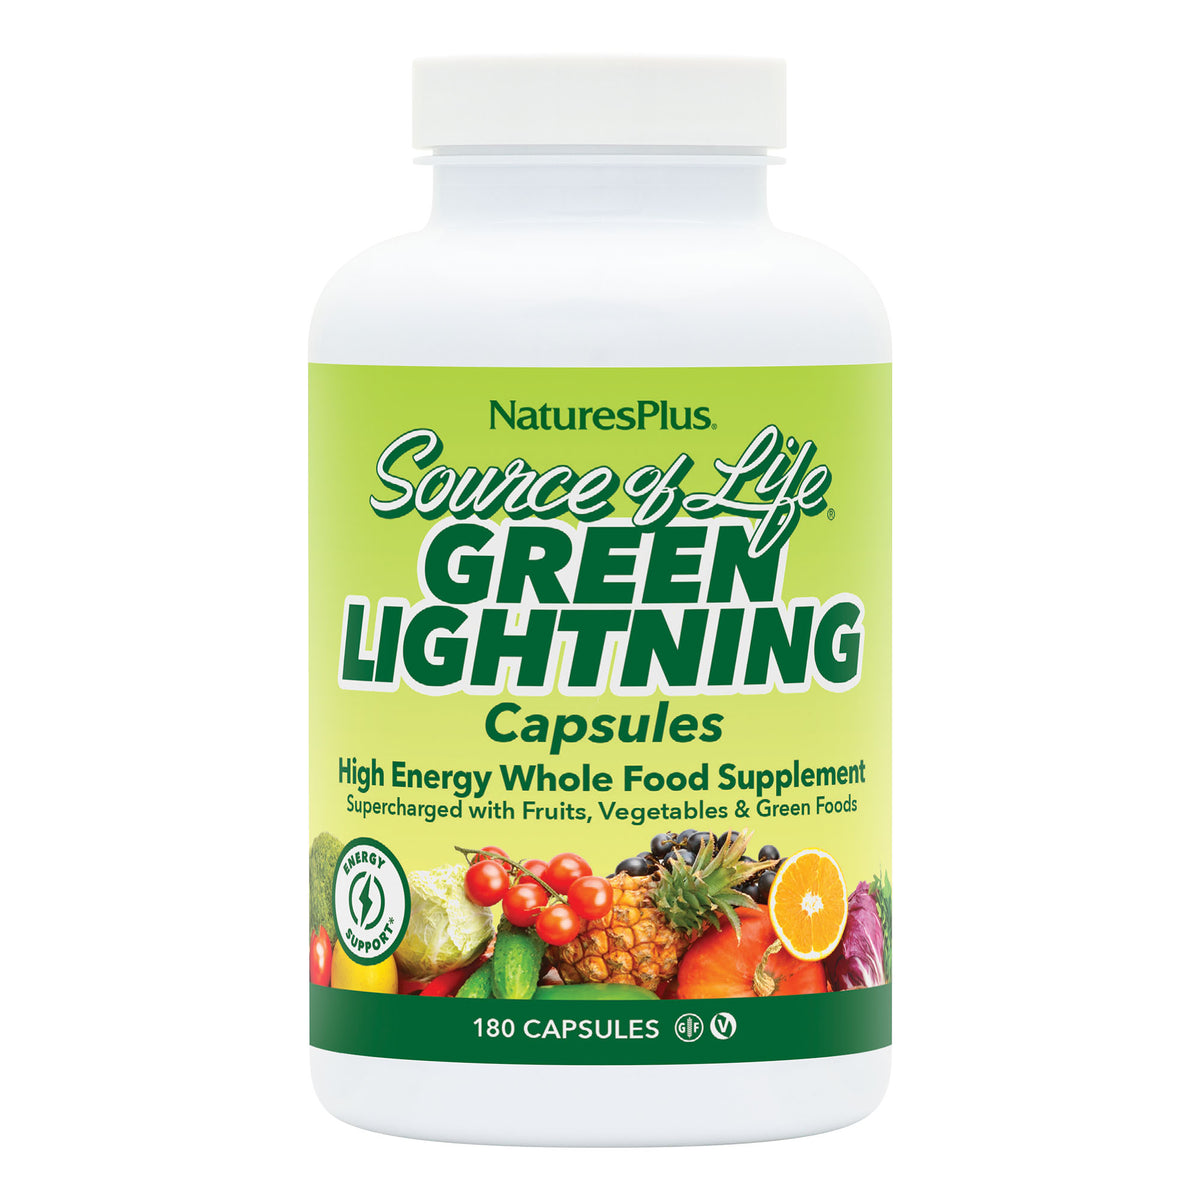 product image of Source of Life® Green Lightning® Capsules containing 180 Count